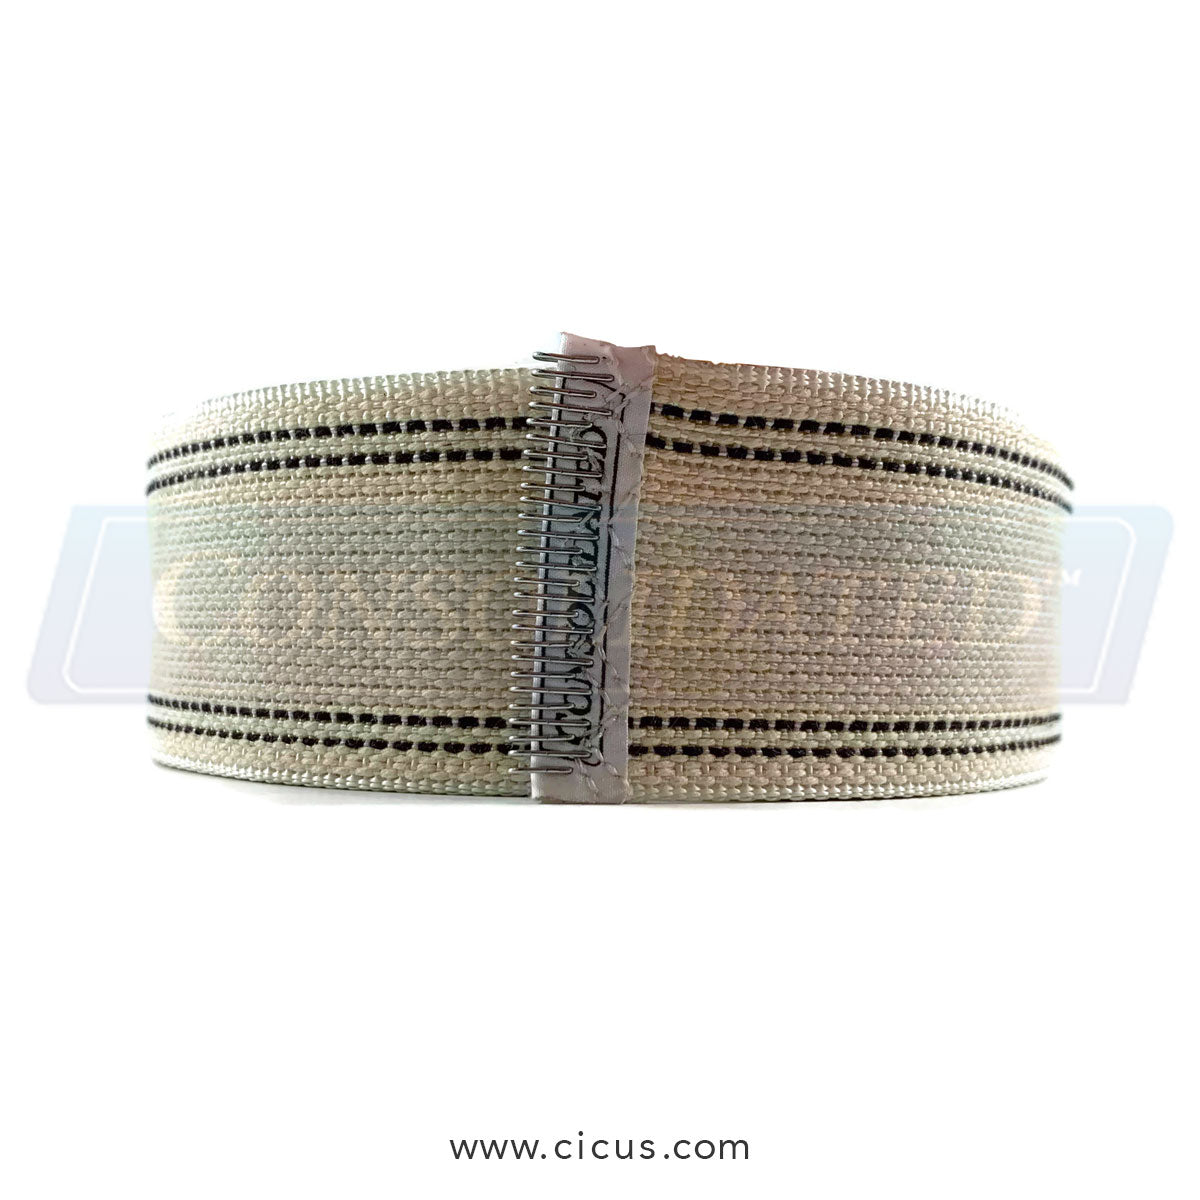 CIC Exclusive Chicago Dryer Canvas Ribbon - 2" x 247" (1001-247)